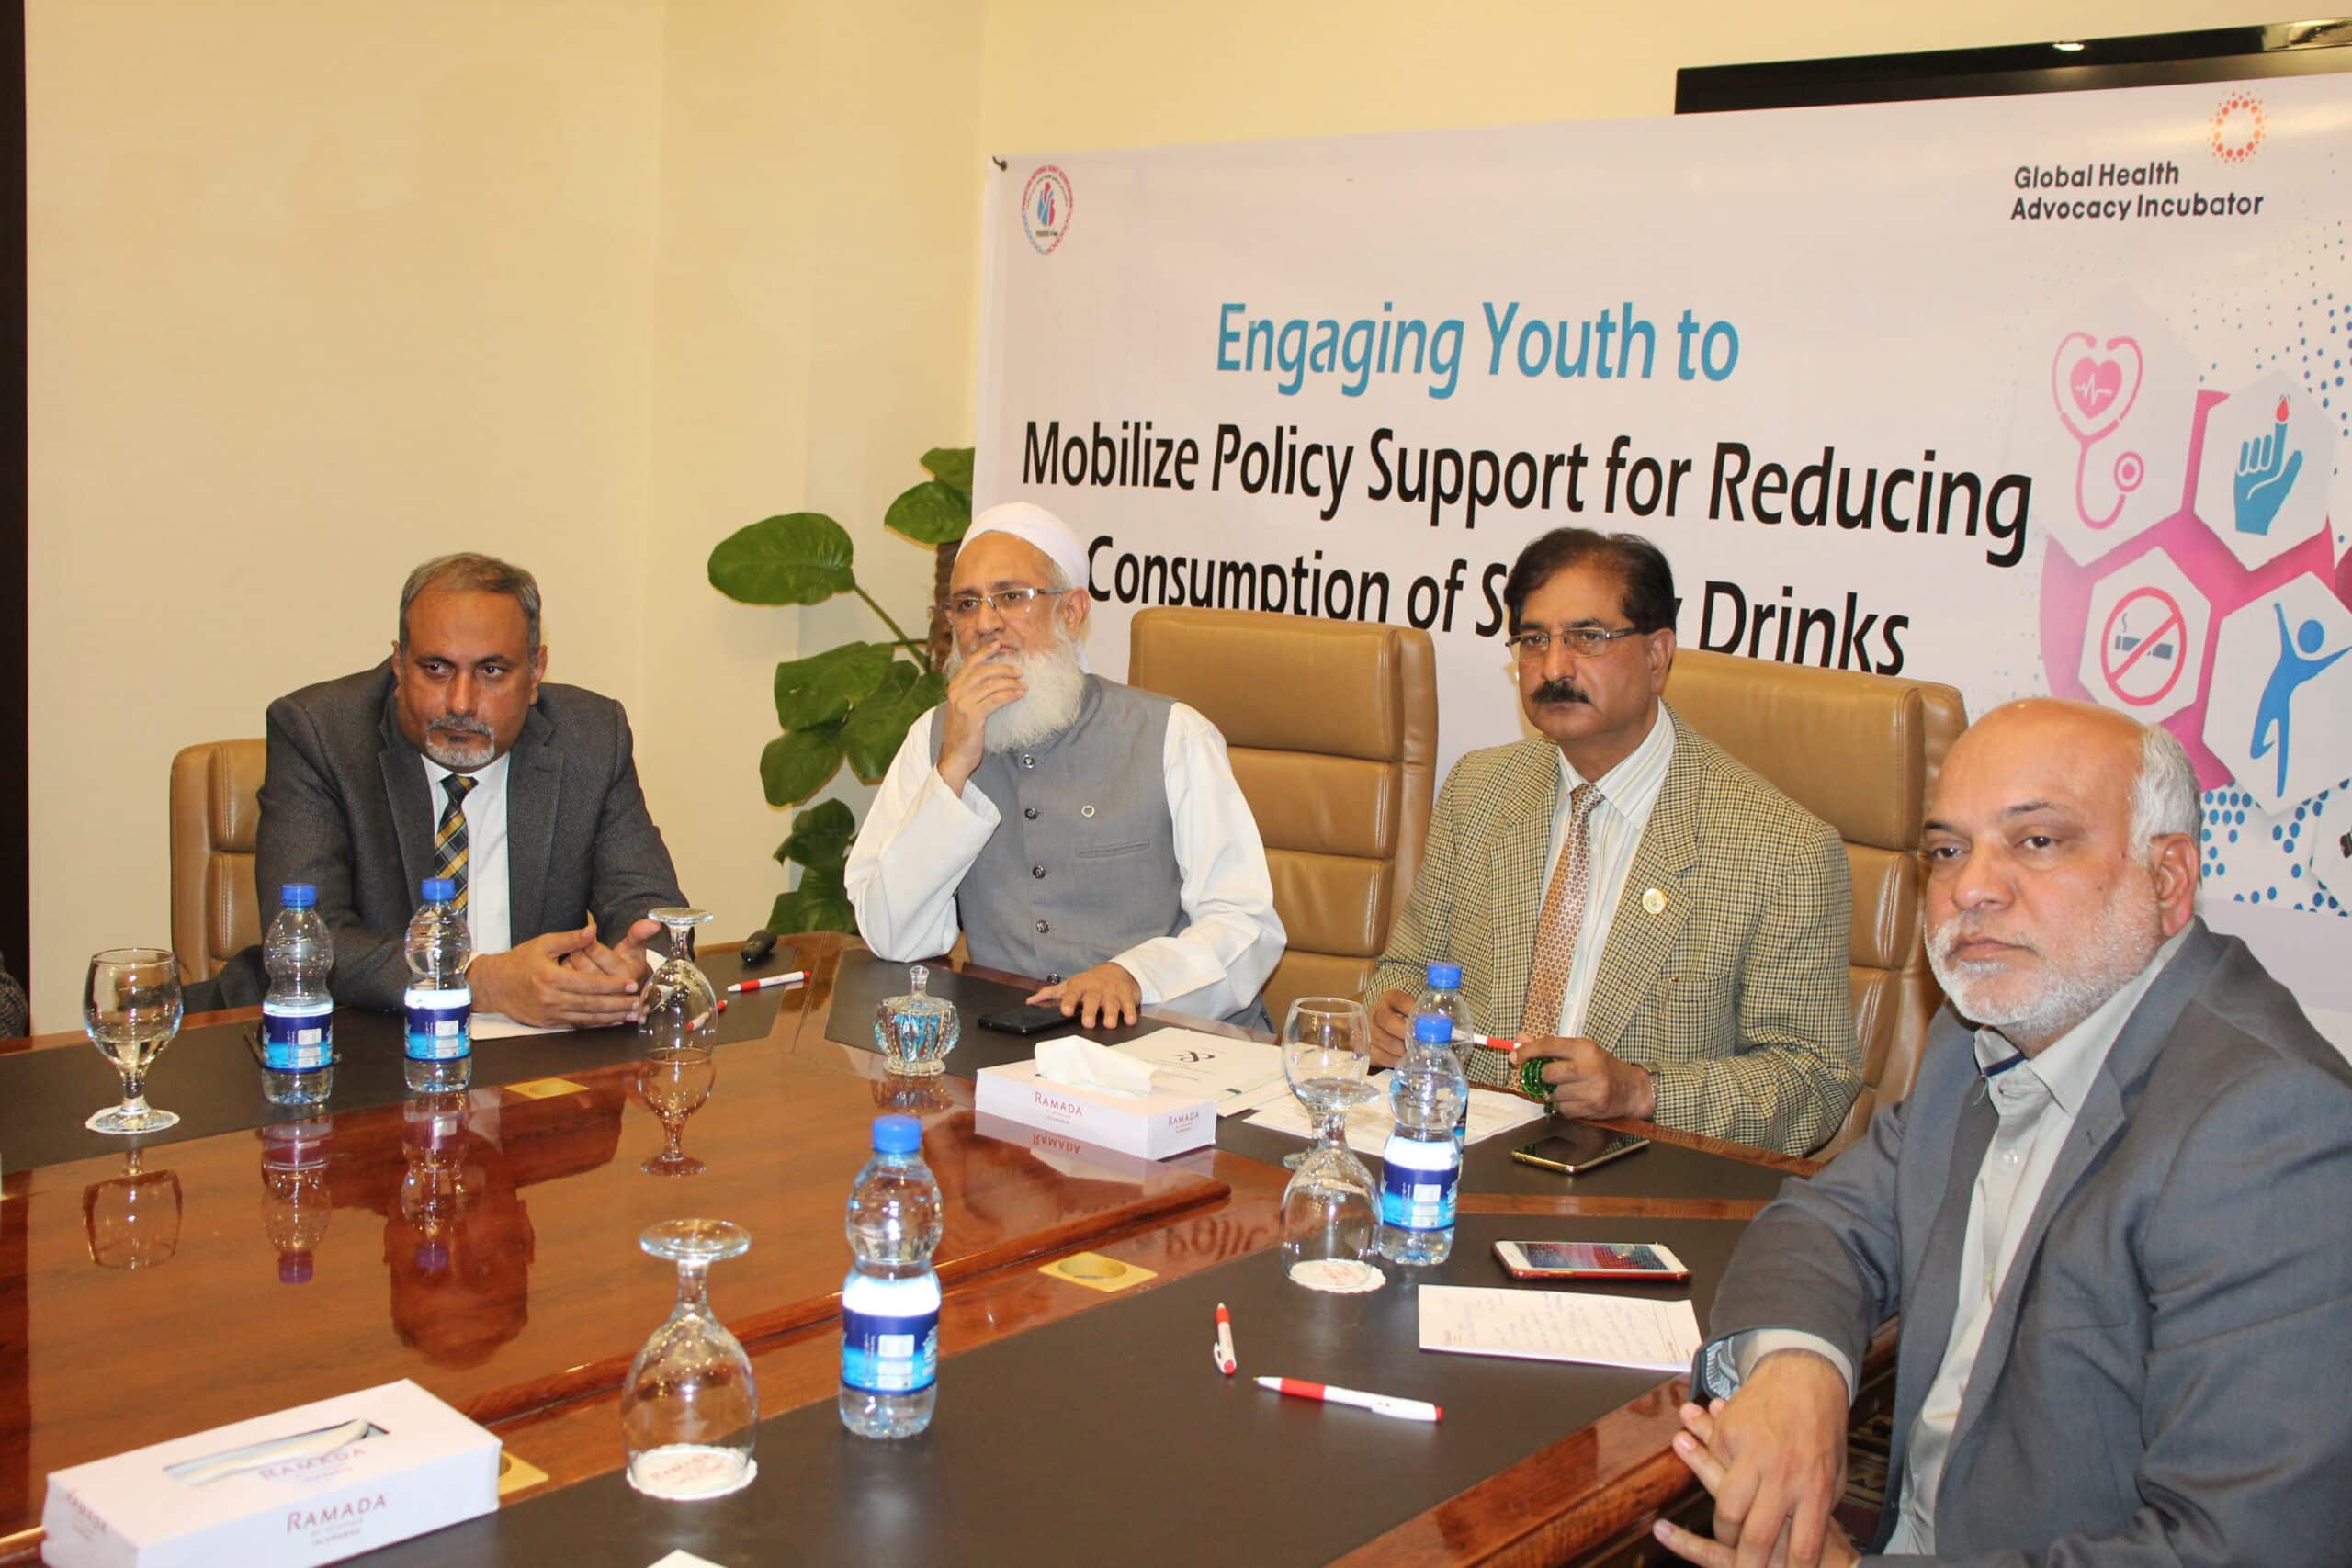 Panah Organized an Event  Engaging Youth to Mobilize  Policy Support for Reducing Consumption Sugary Drinks at Ramada Hotel Islamabad